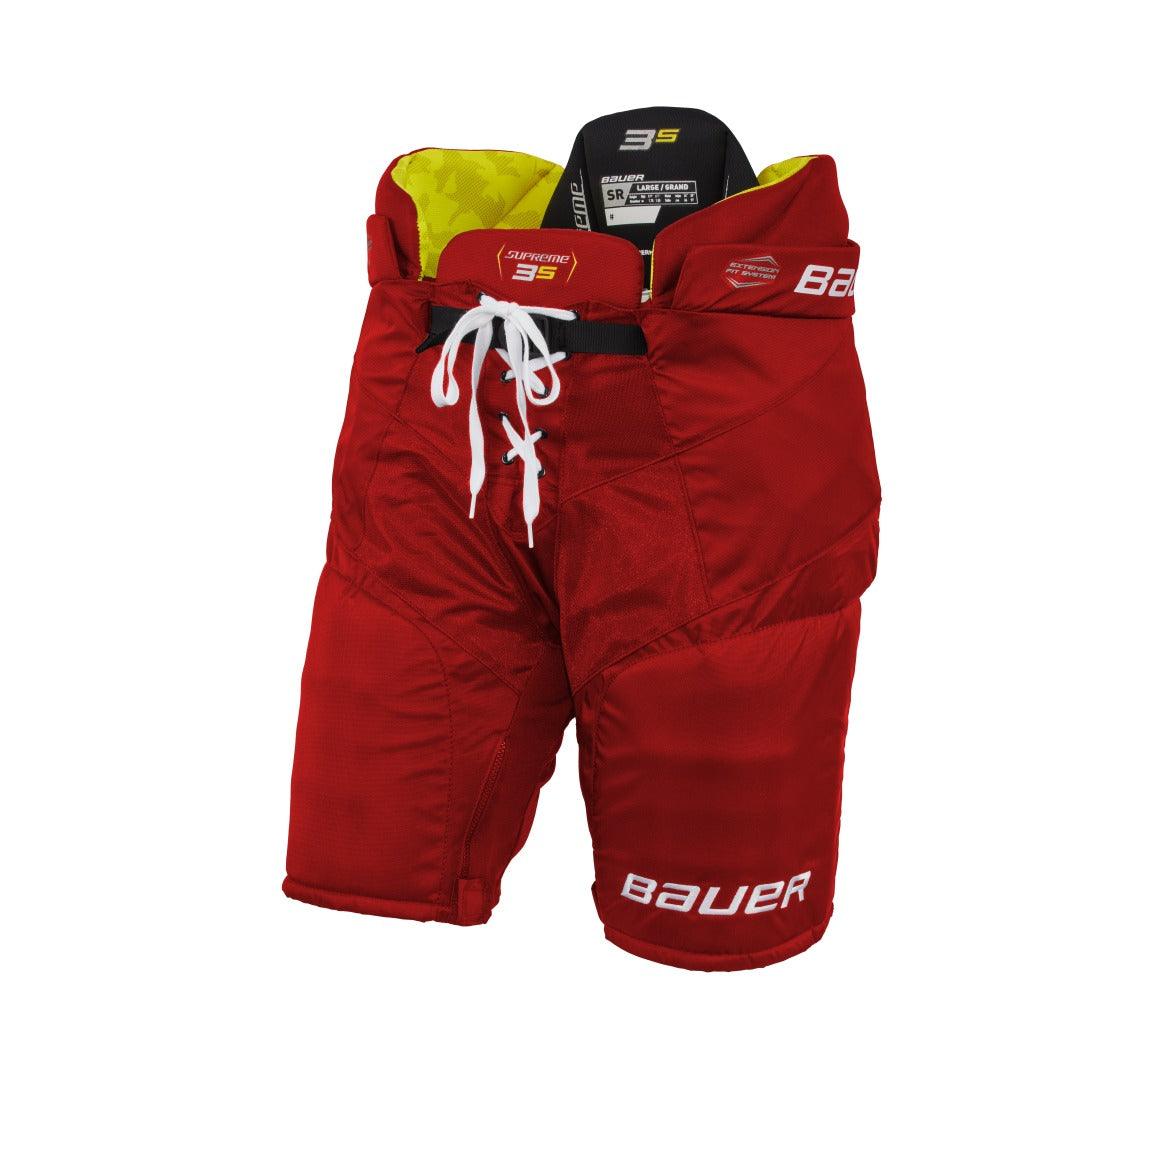 Supreme 3S Hockey Pant - Intermediate - Sports Excellence